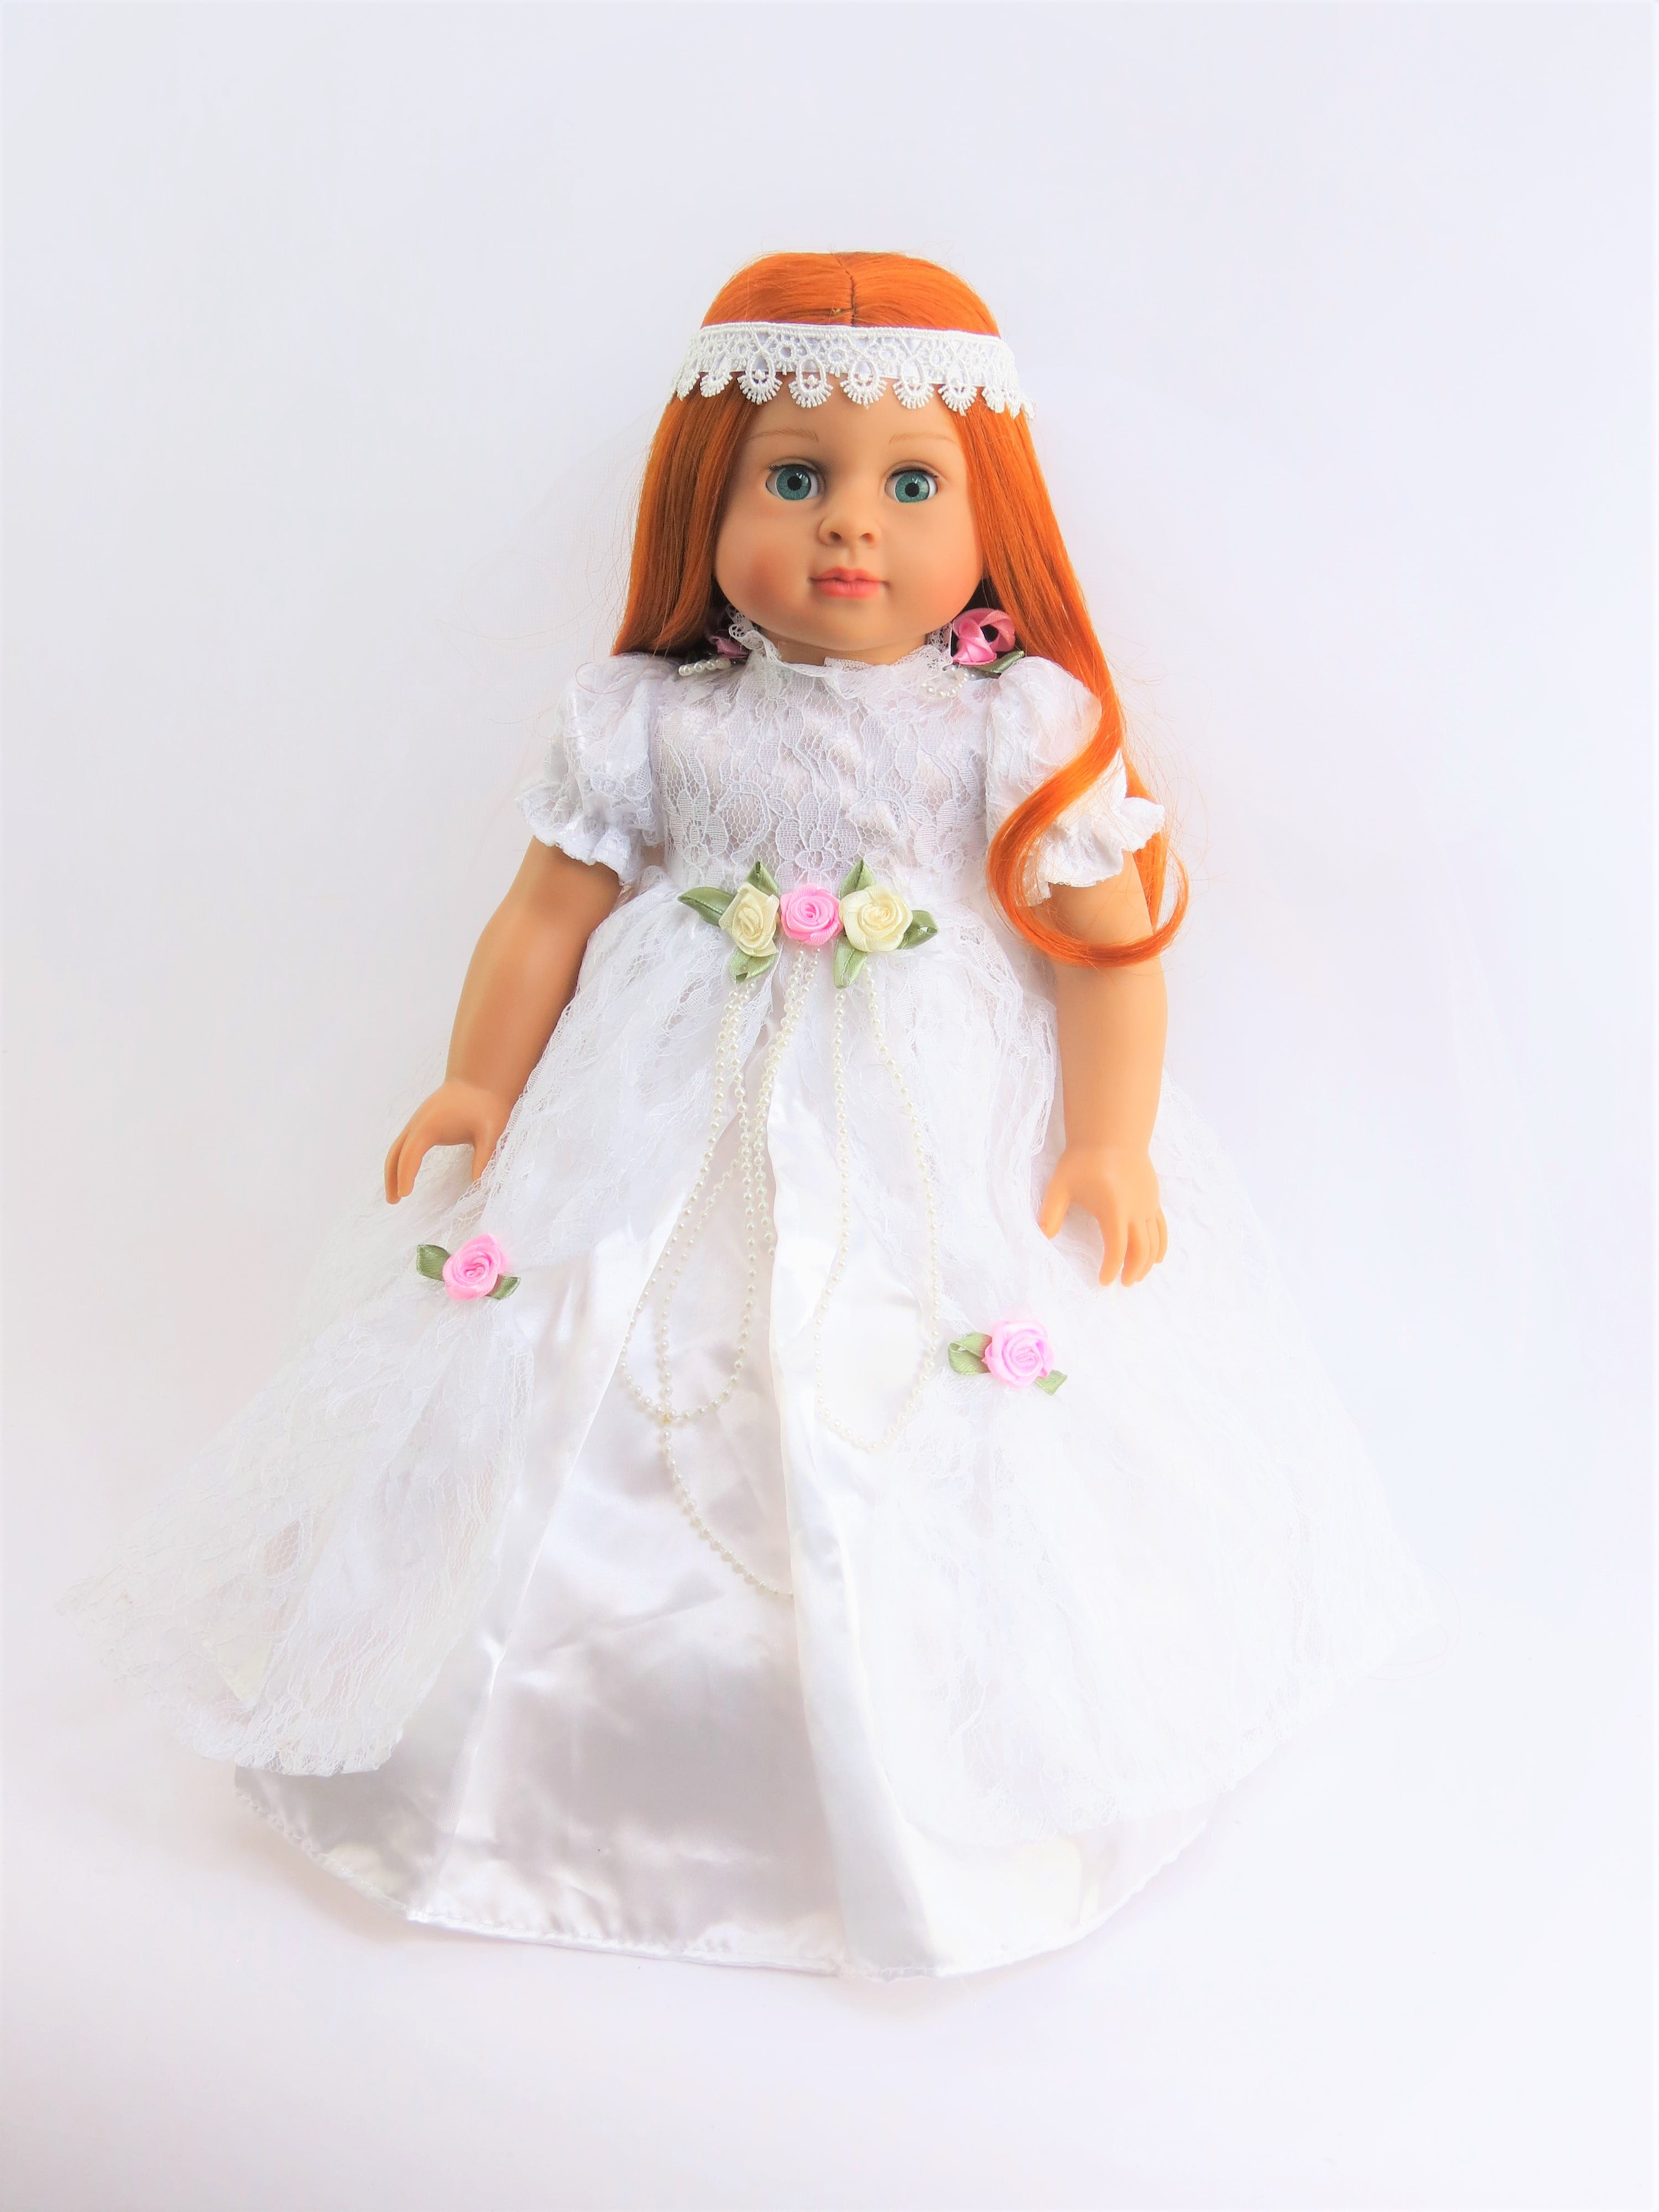 Fits18 inches American Girl fashion Doll Clothes dress Madame Alexander Handmade